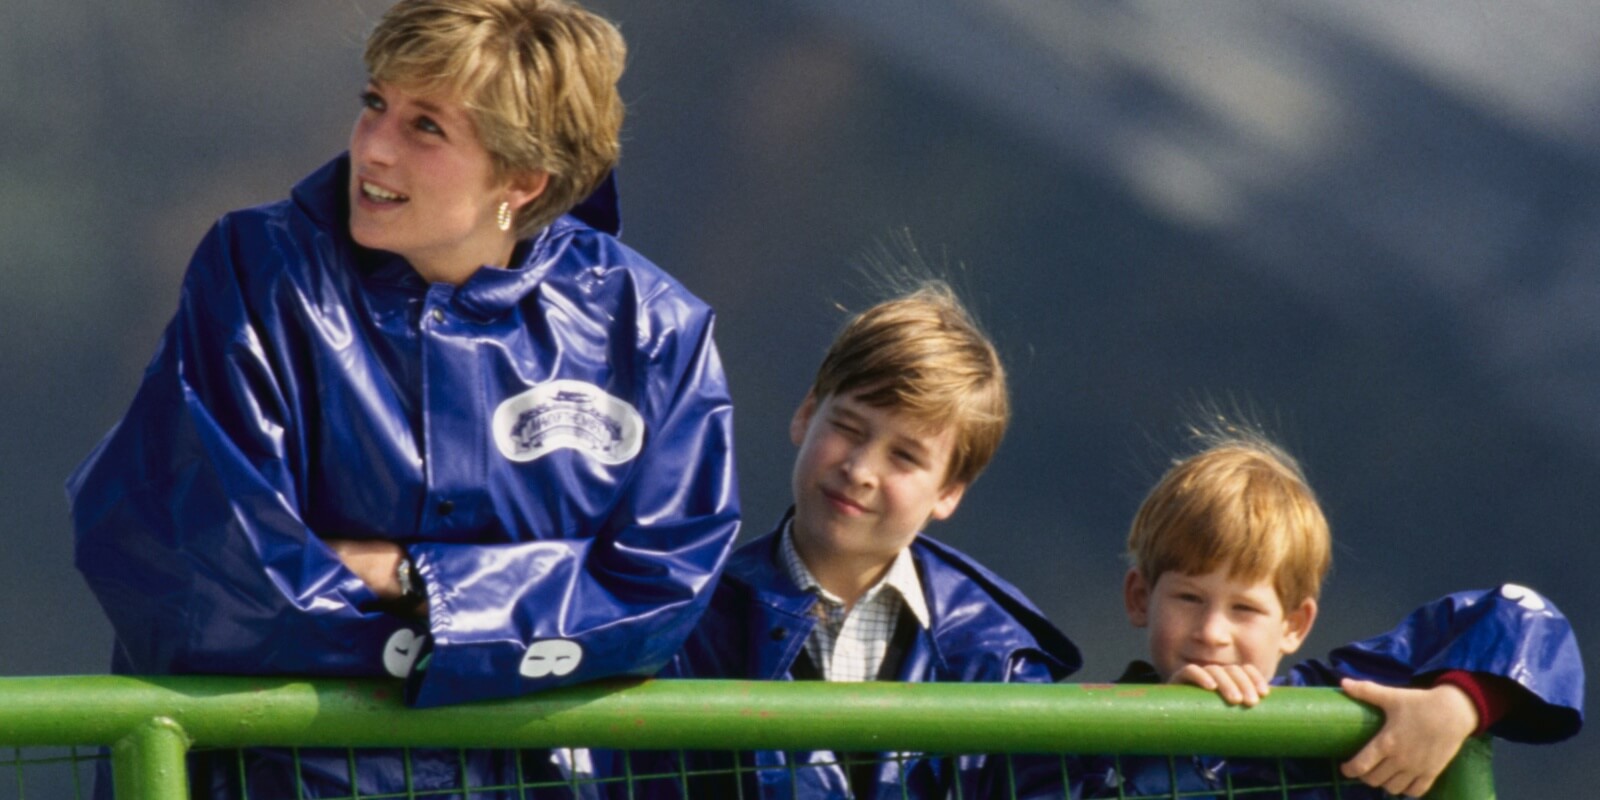 Princess Diana, Prince William and Prince Harry photographed in Canada in 1991.